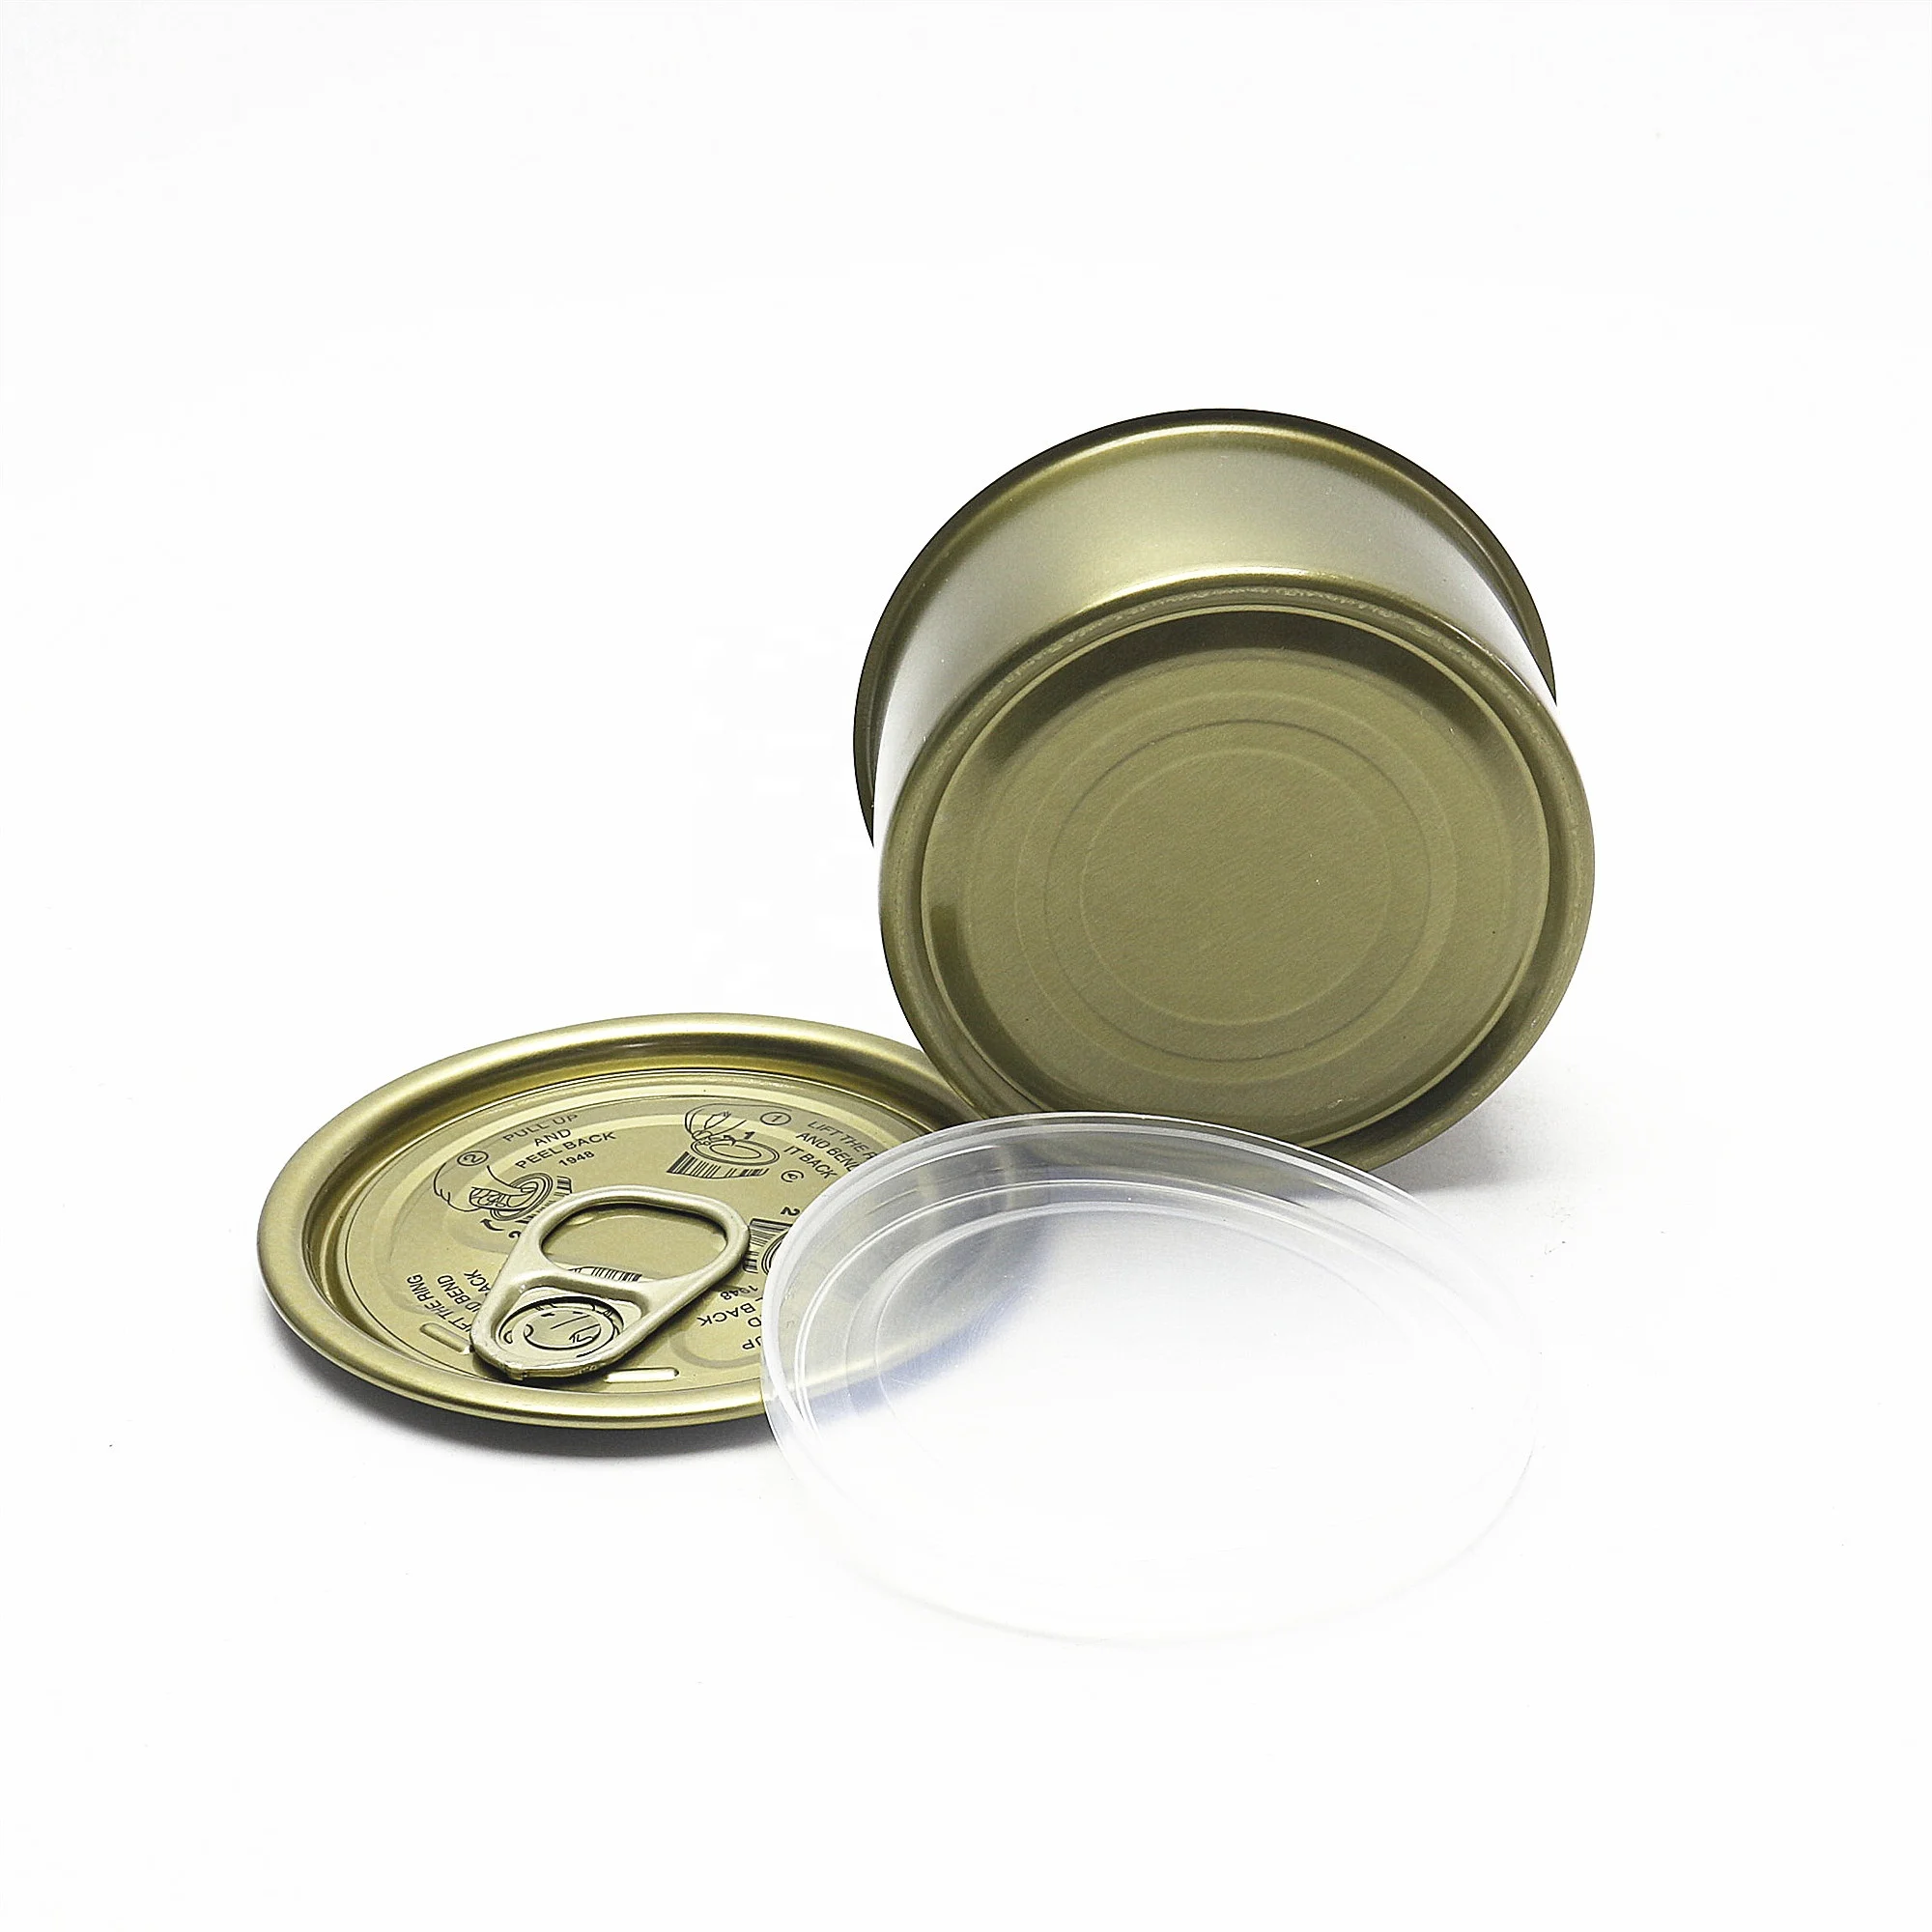 Tuna Gold Tin Cans For Food Canning Fish Of 100ml In Stock Tc 98k Buy 100ml Canned Tuna Cans In Stock Gold Food Canning Fish Cans Tuna Tin Can Of 100ml Product On Alibaba Com